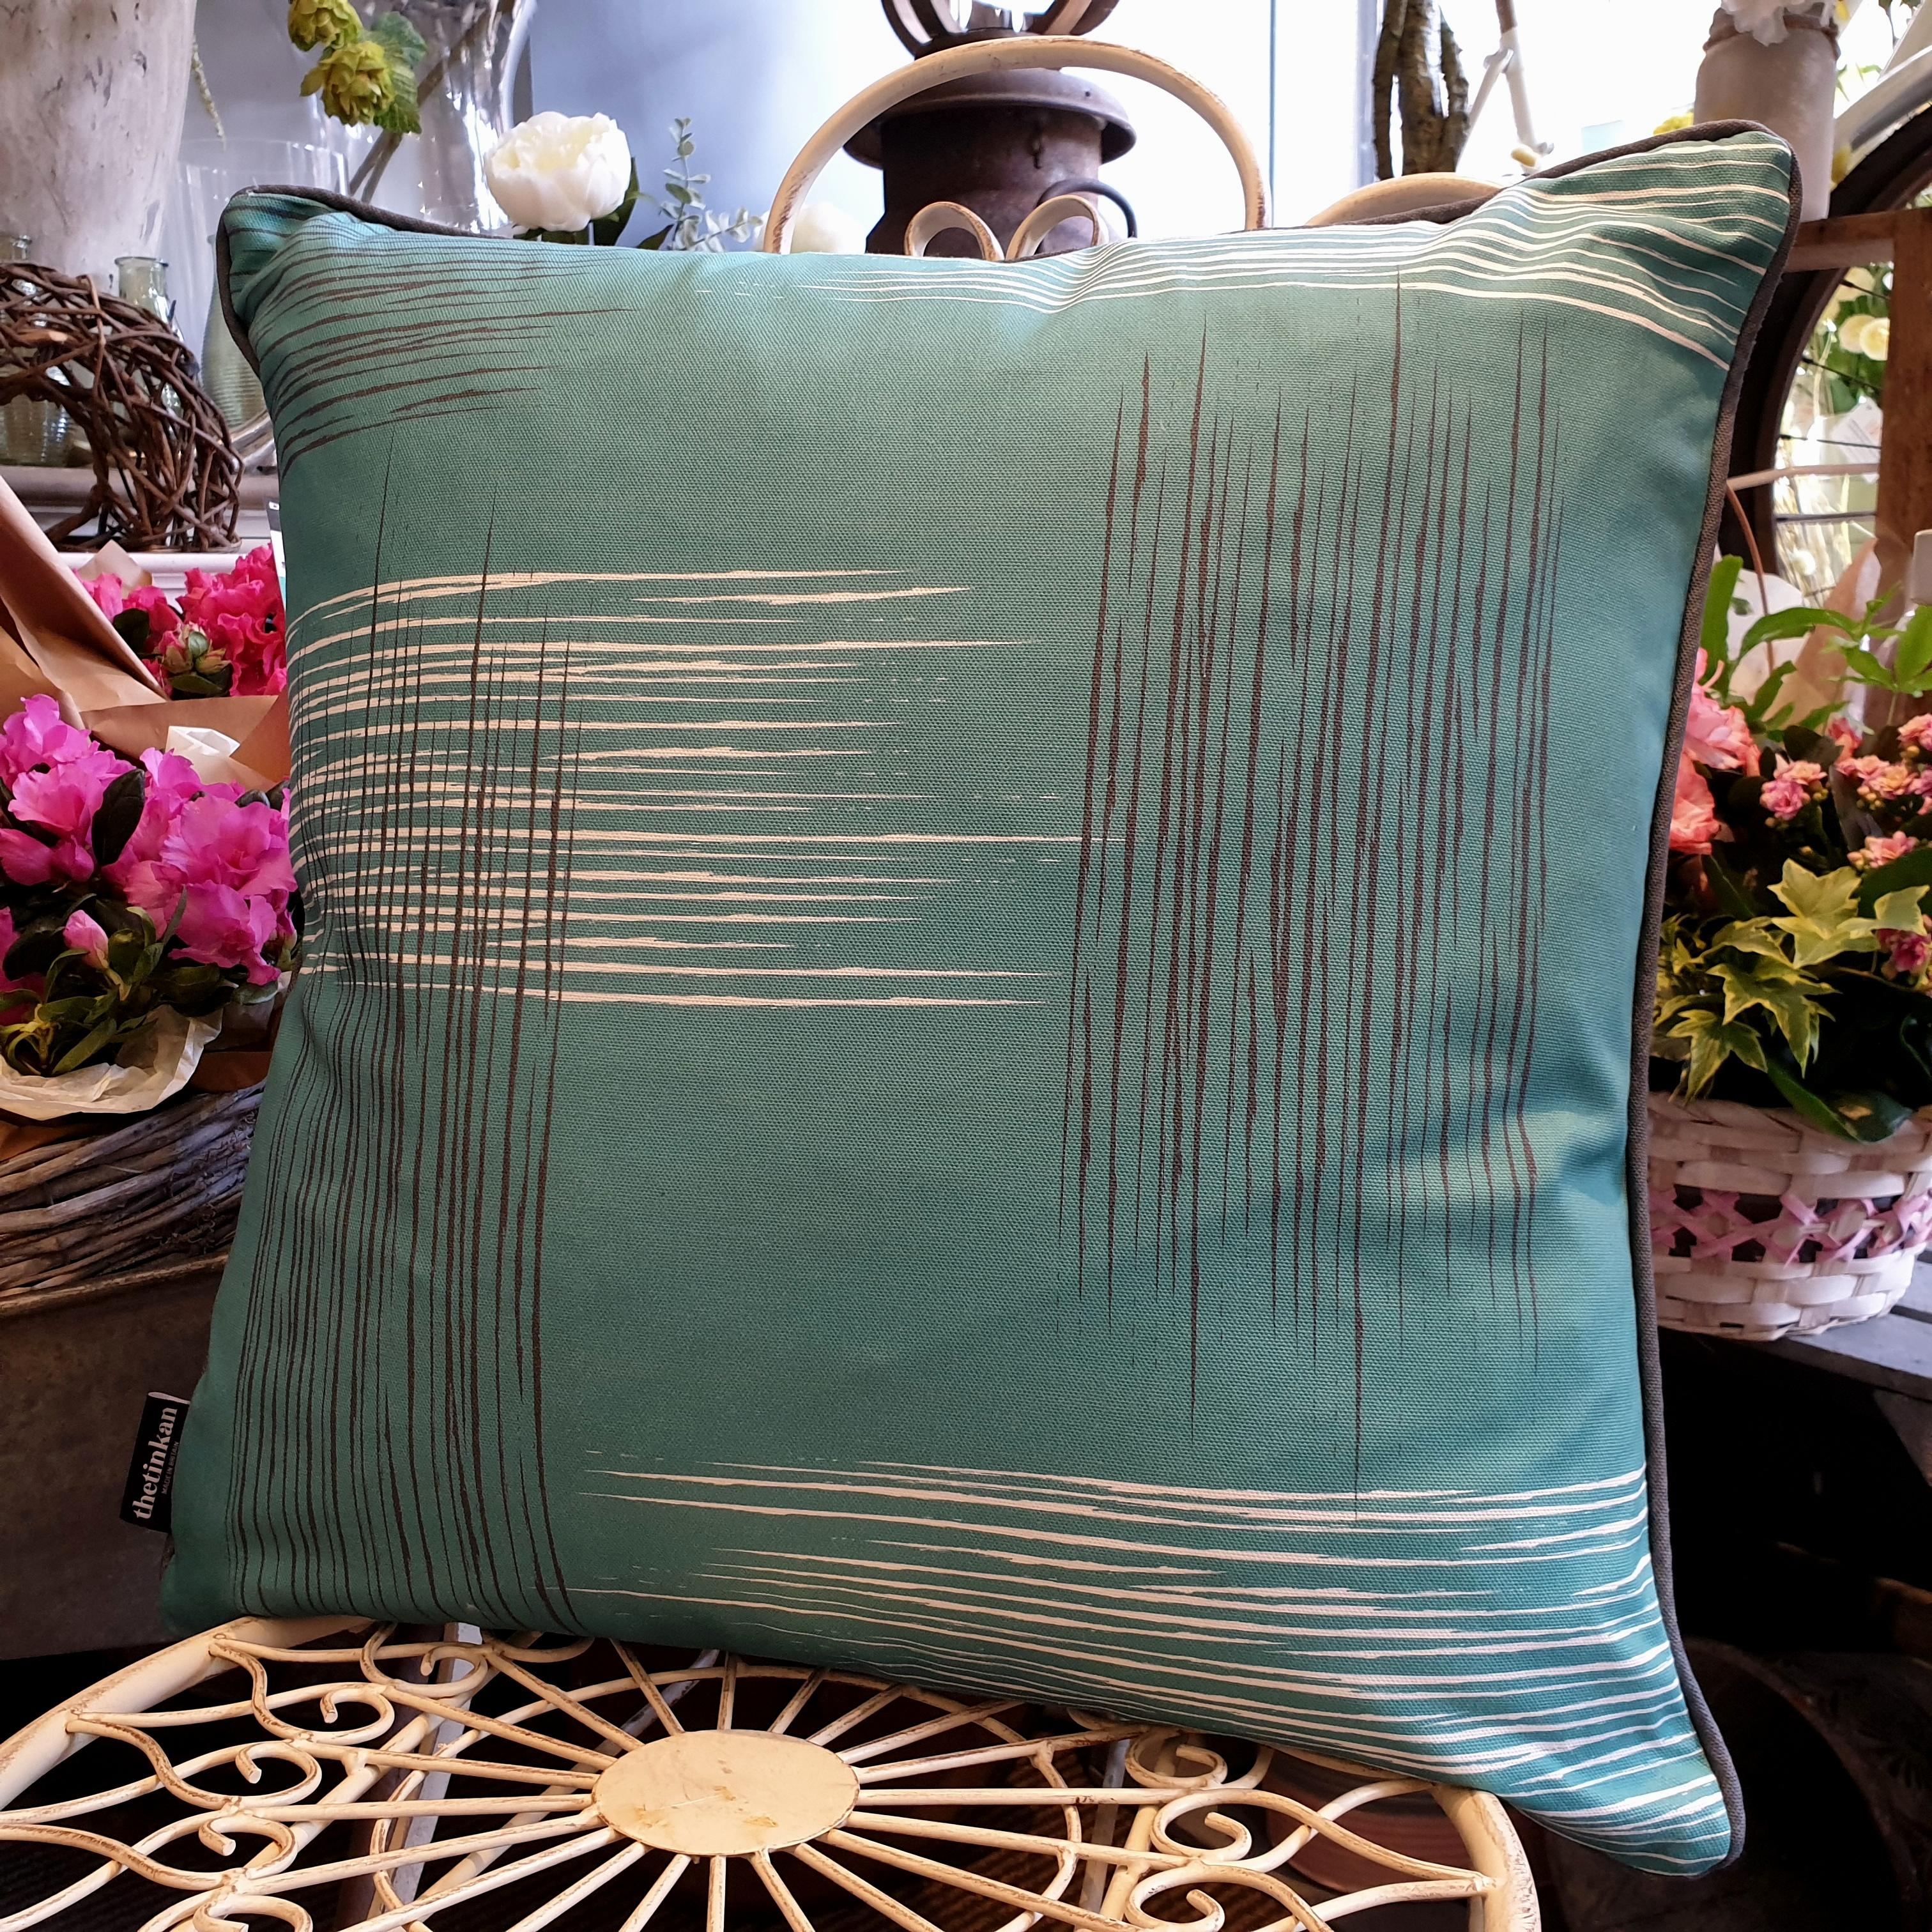 Double-sided aqua teal 51cm square retro themed cushion with artistic grey and white shards and grey handcrafted piping designed by thetinkan. Available with an optional luxury cushion inner pad. VIEW PRODUCT >>